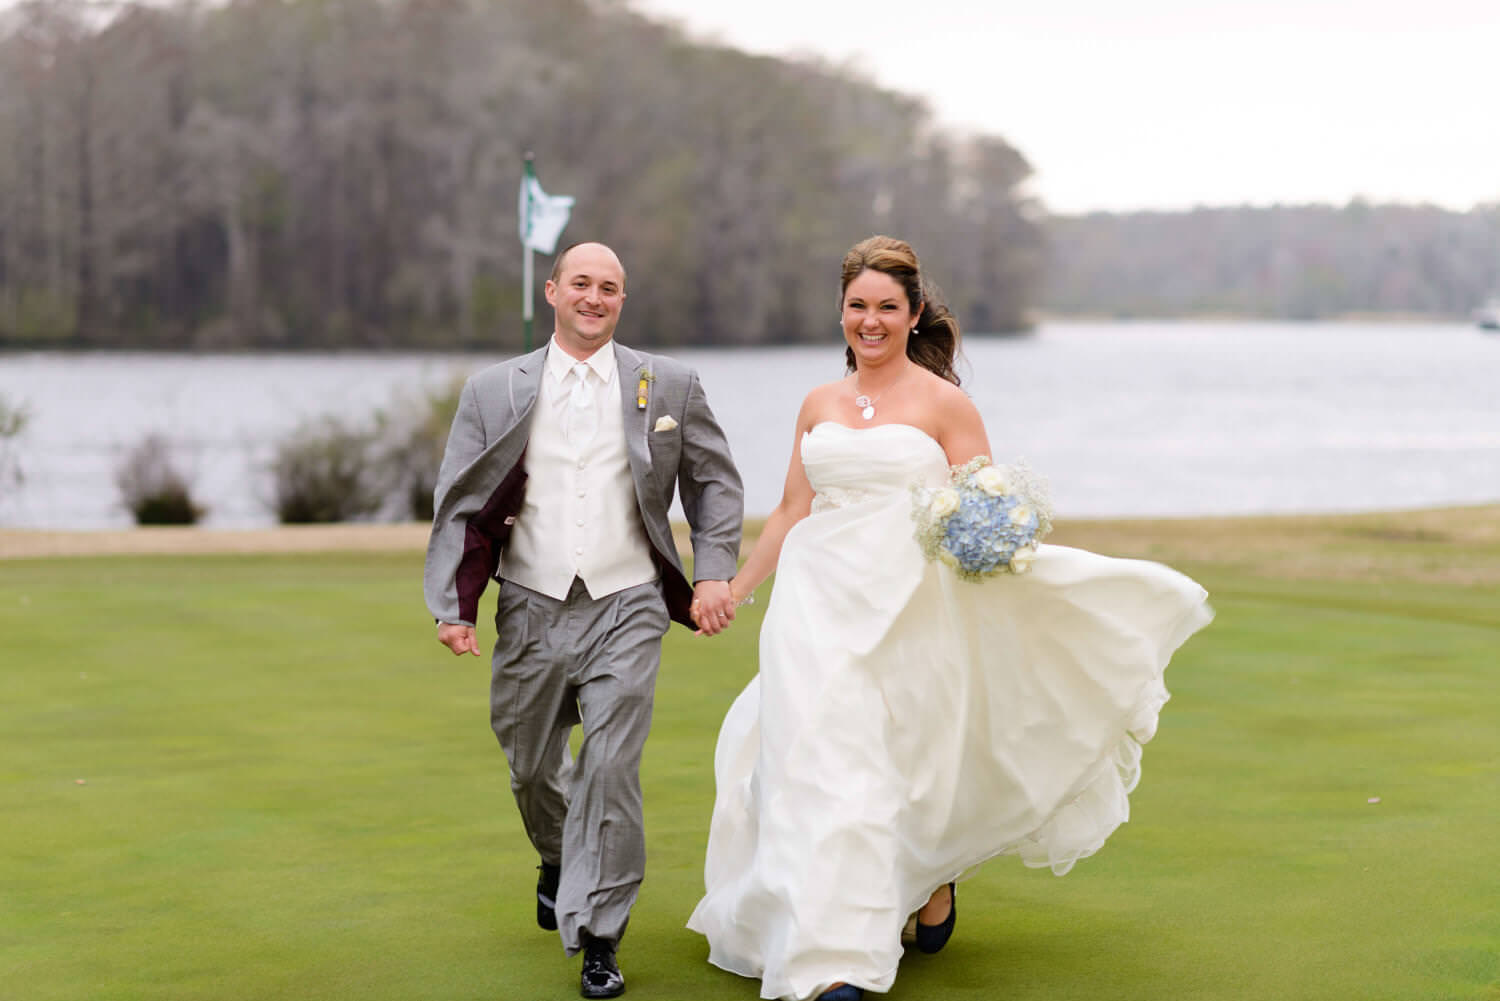 Cute picture of bride and groom running on golf course at Wachesaw Plantation